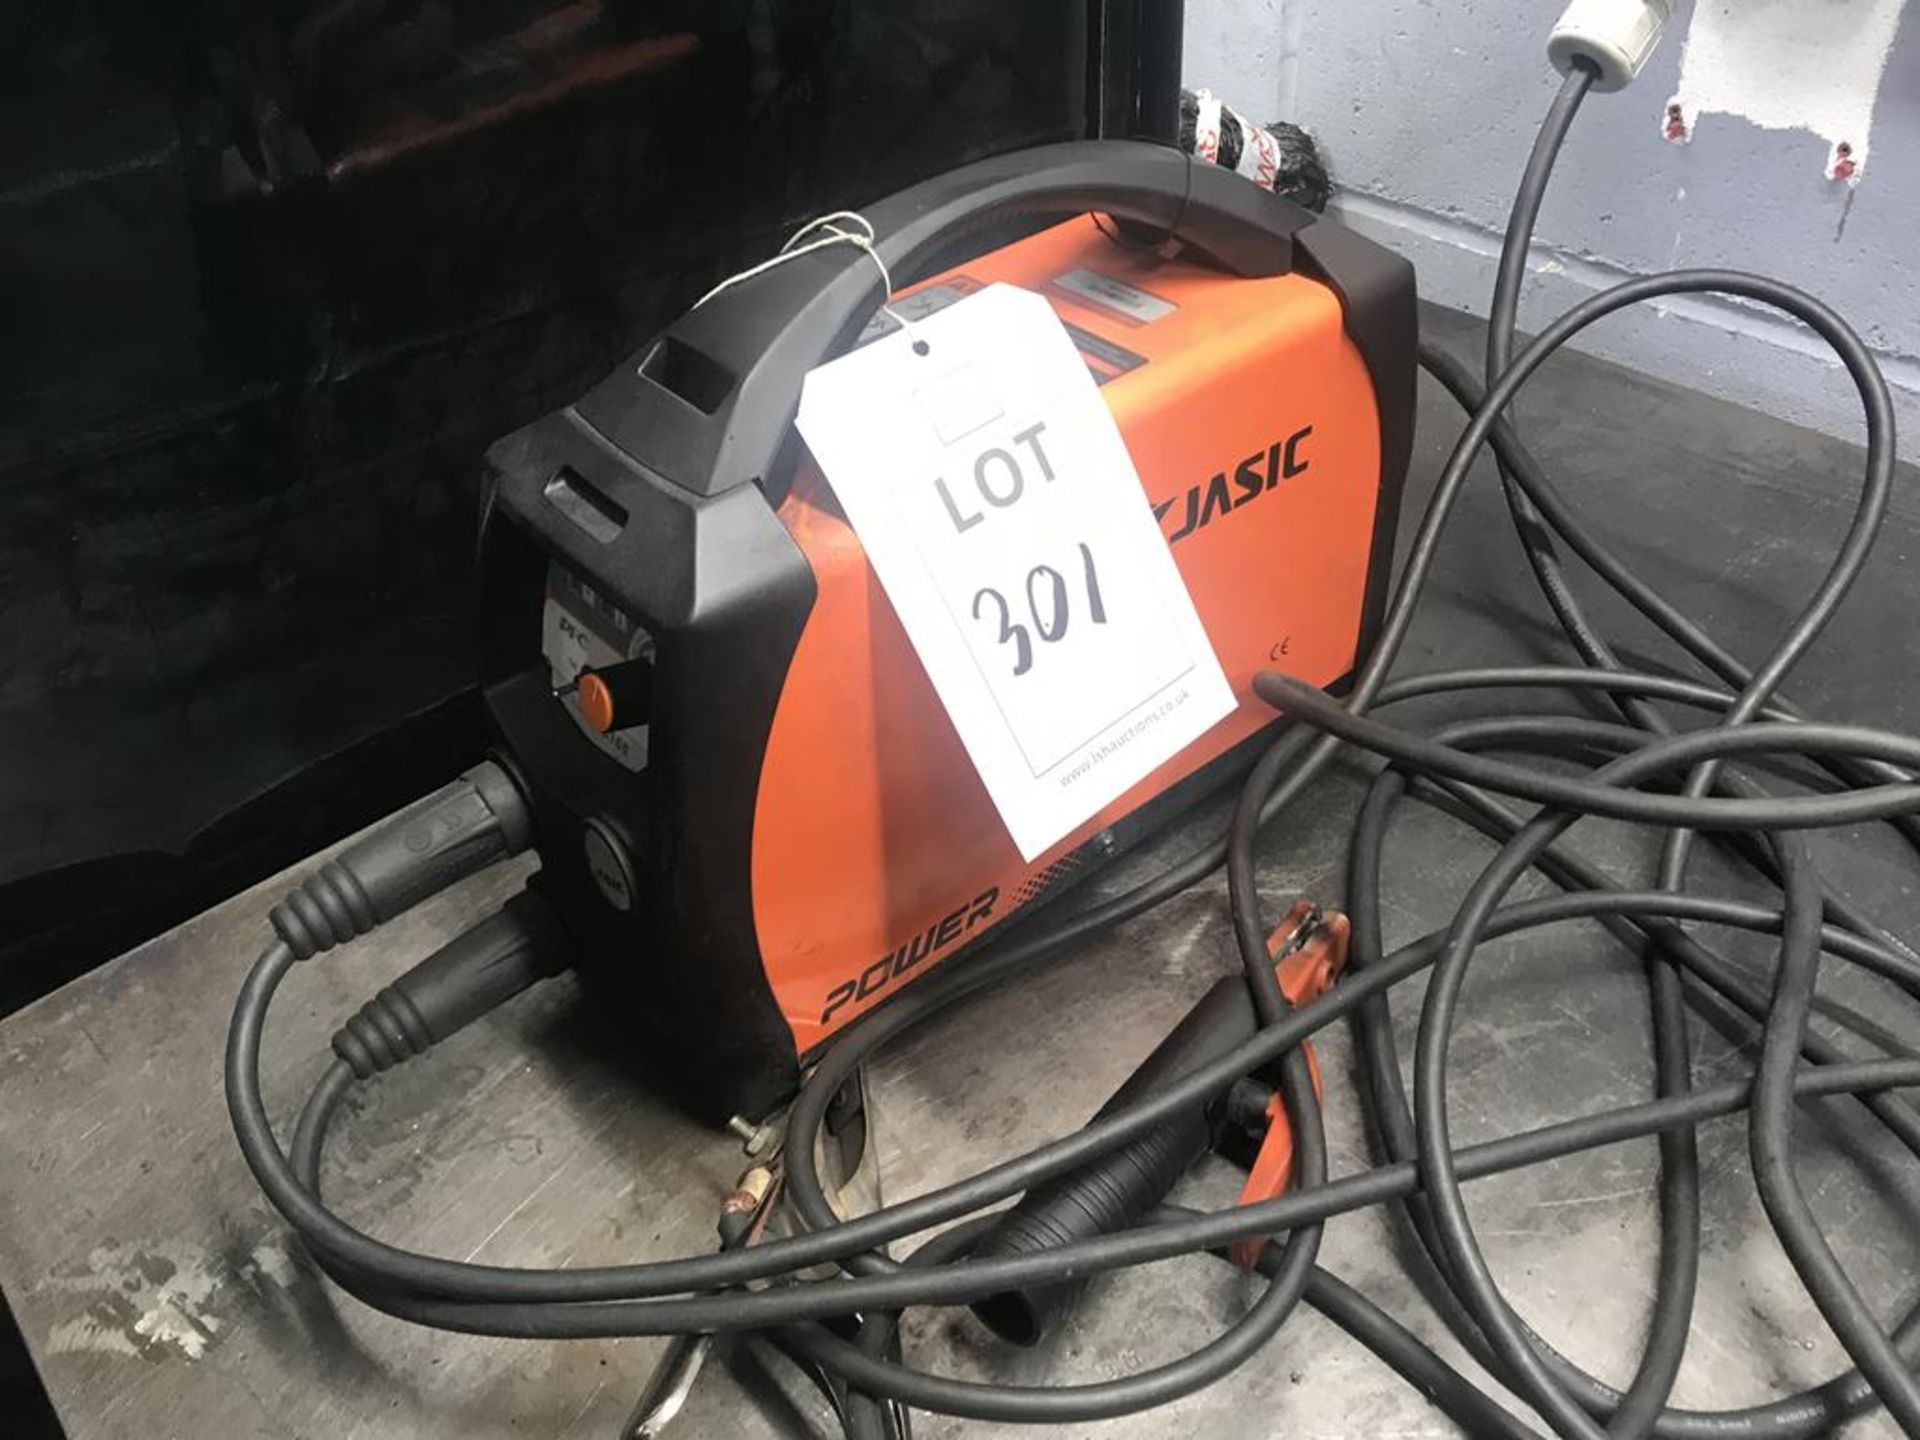 Jasic Arc 160 arc welder with leads and torch